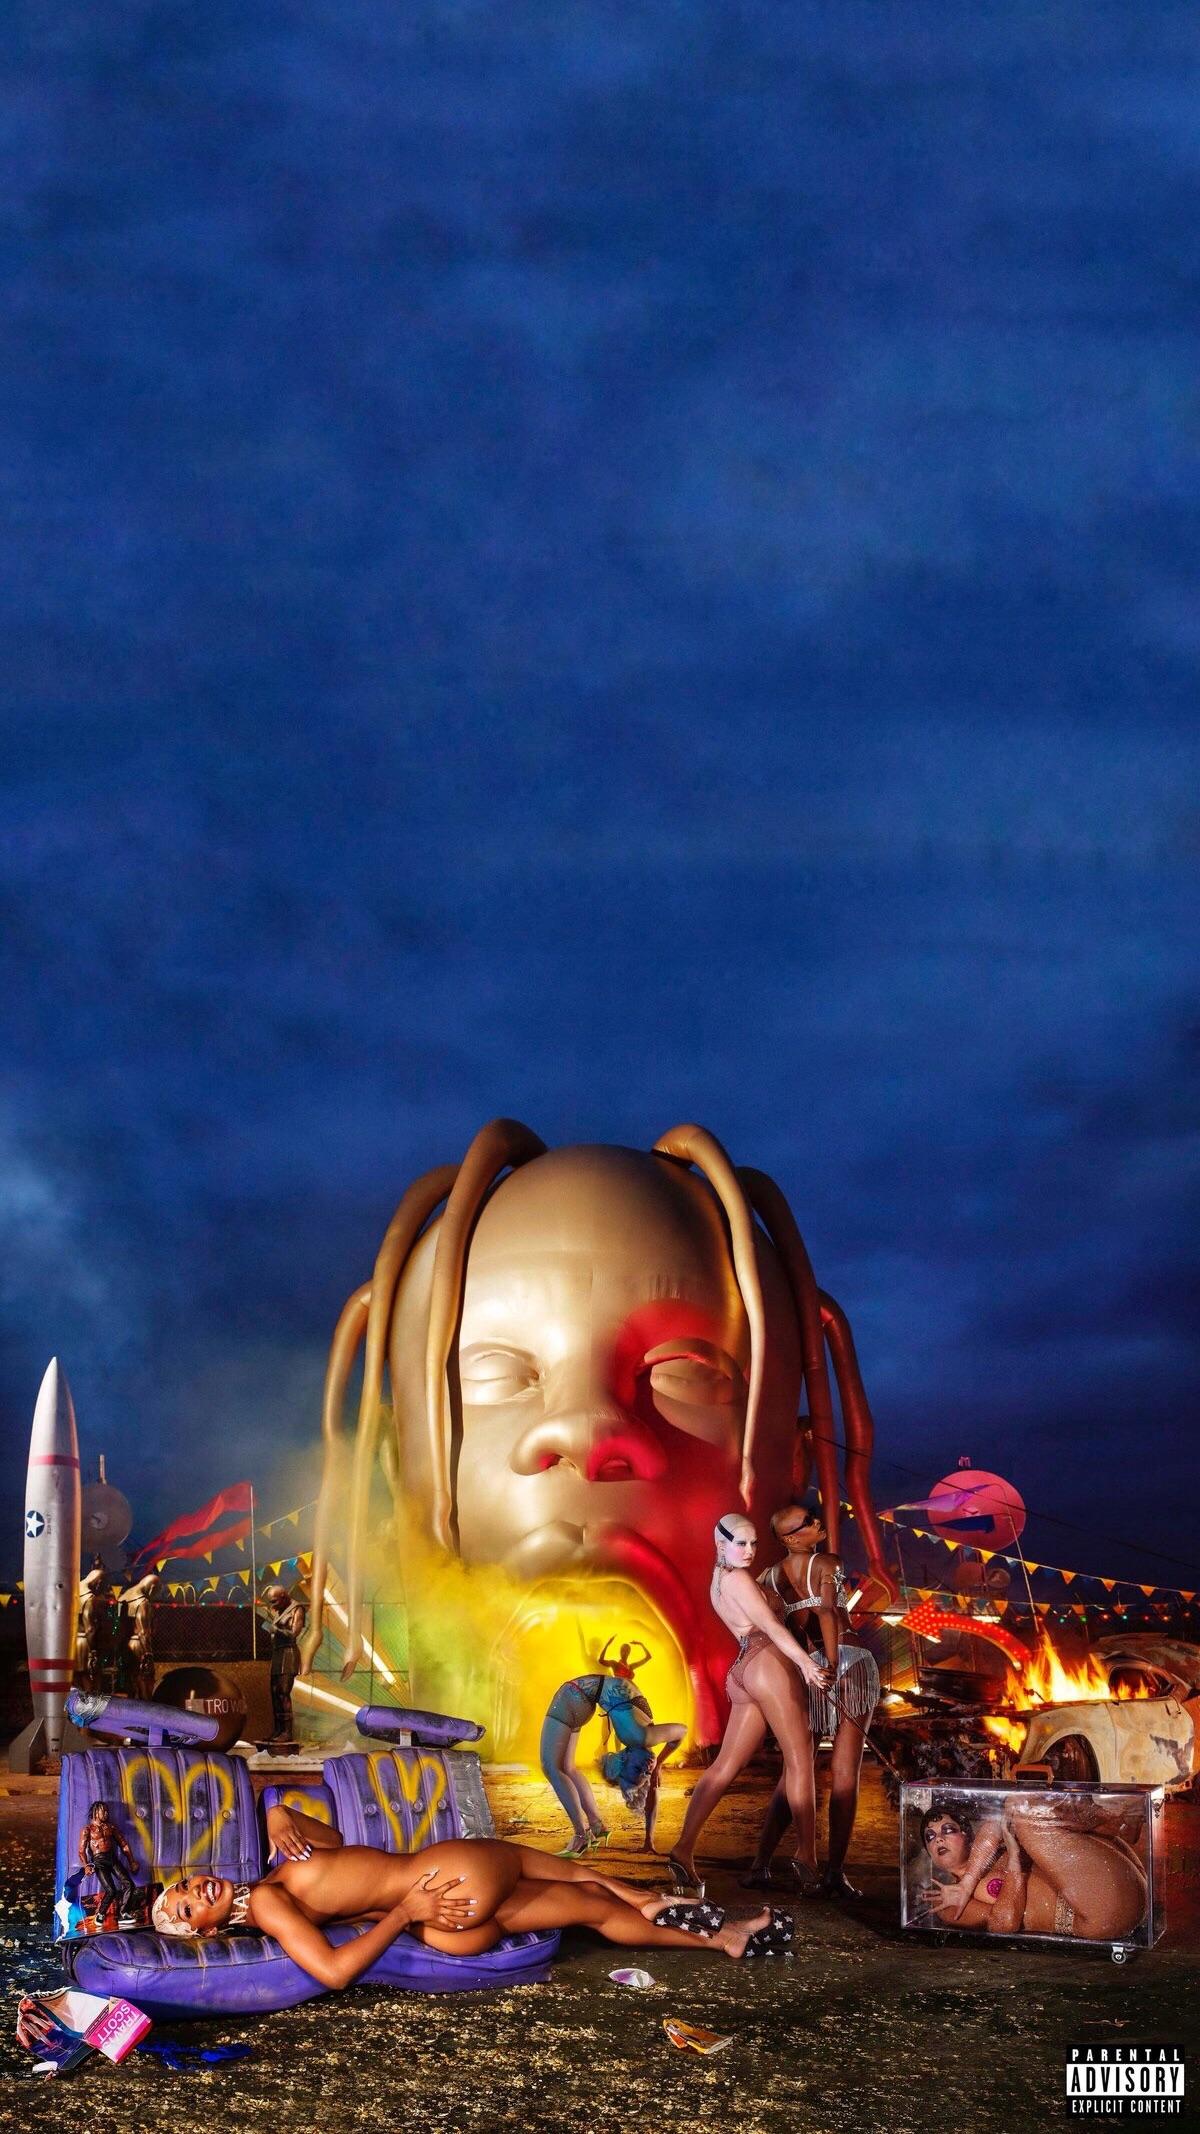 Second Astroworld Cover as Phone Wallpaper